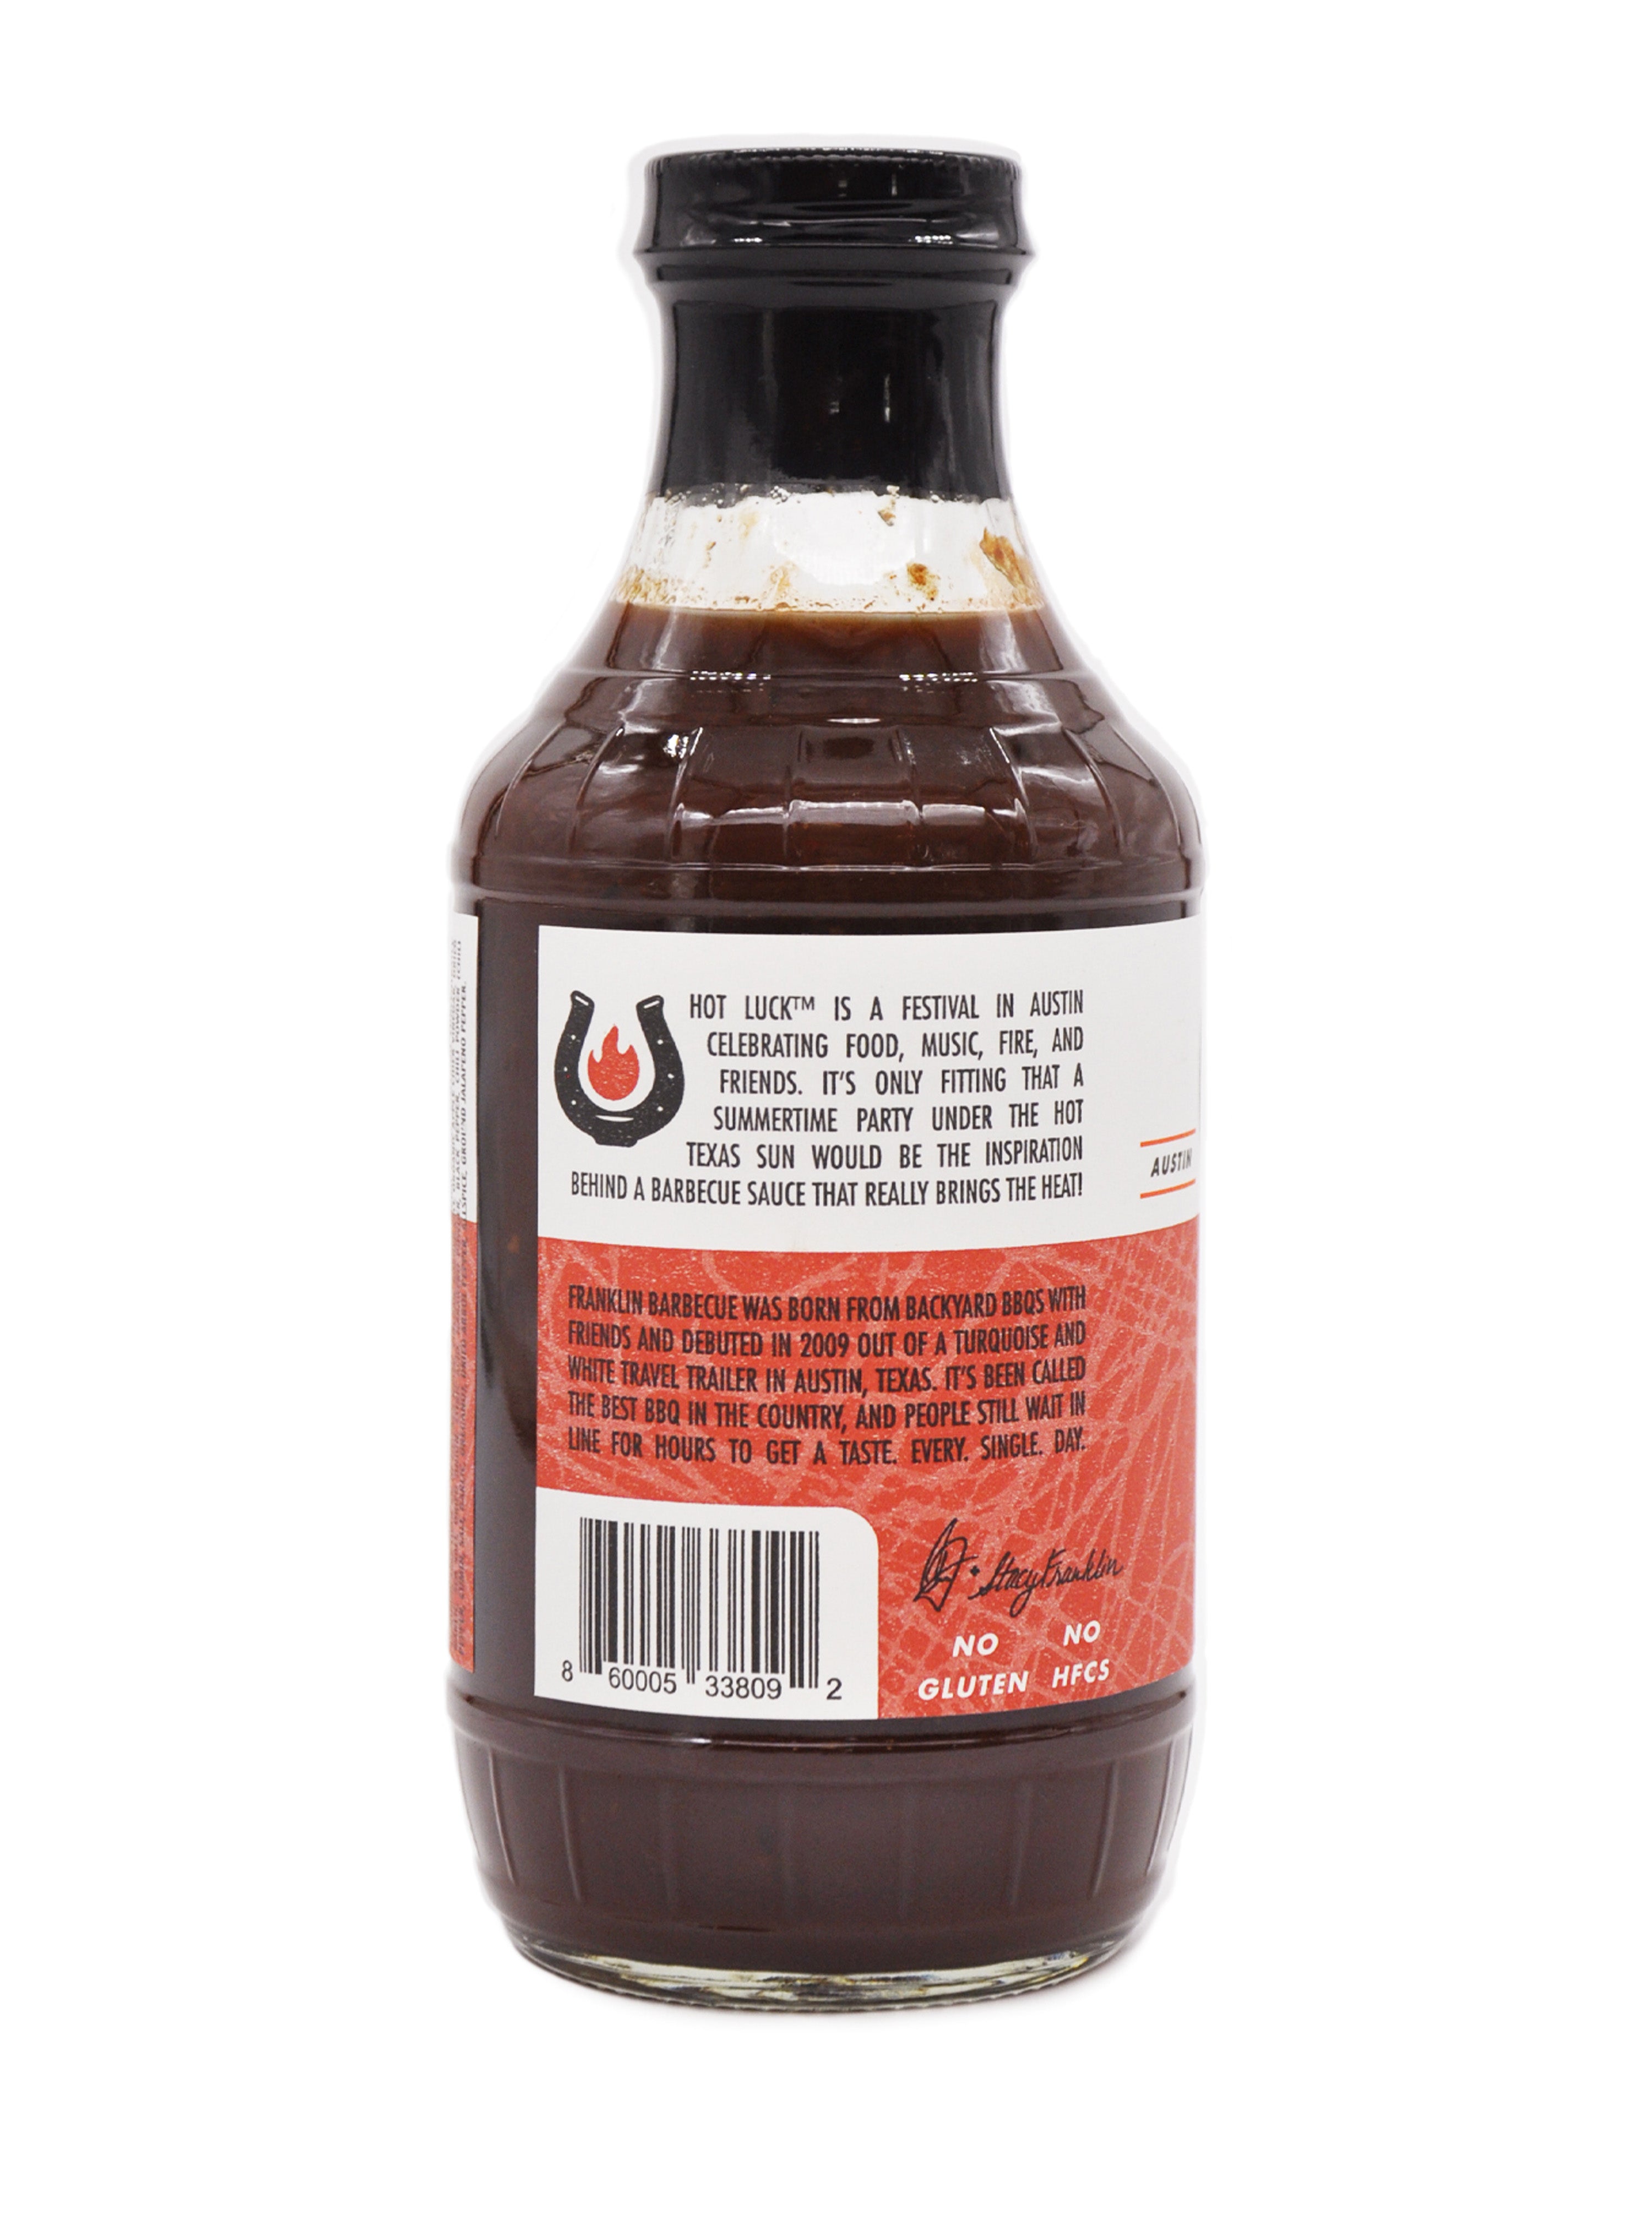 Back label of Franklin Barbecue Spicy sauce showing tasting notes and background story of the restaurant.